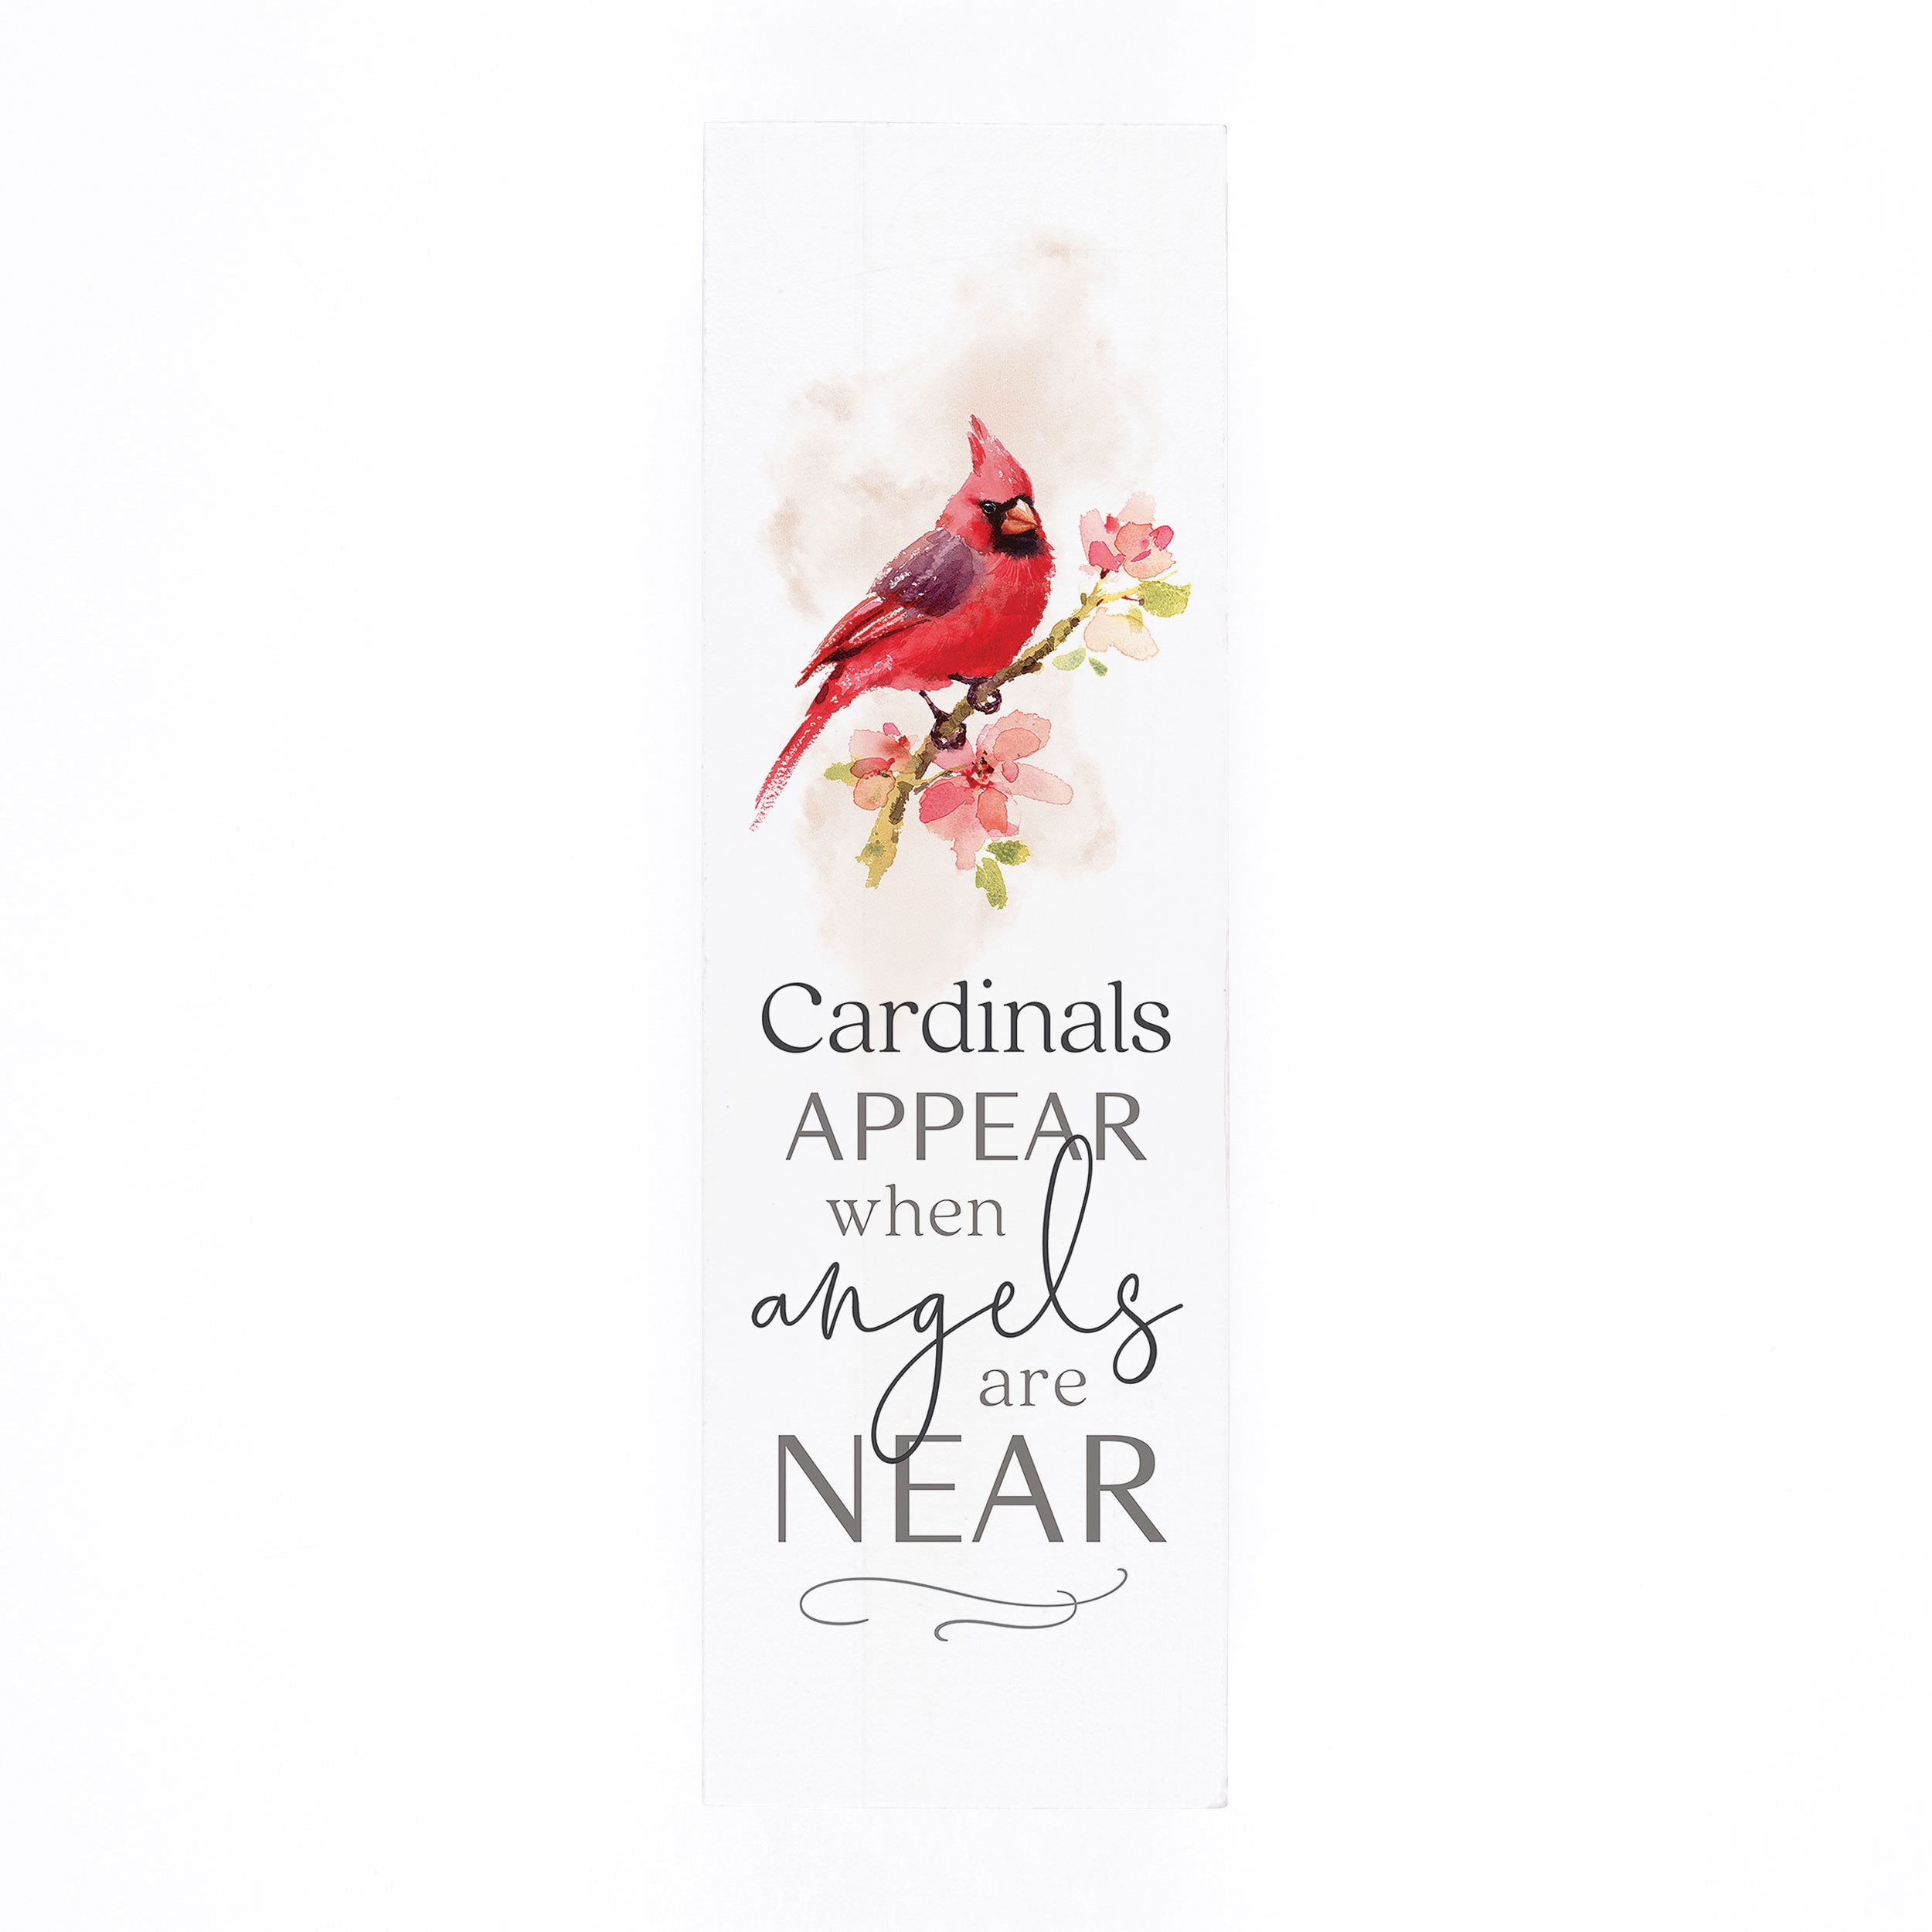 Angels Are Near-Cardinals Mouse Pad – Wild Wings